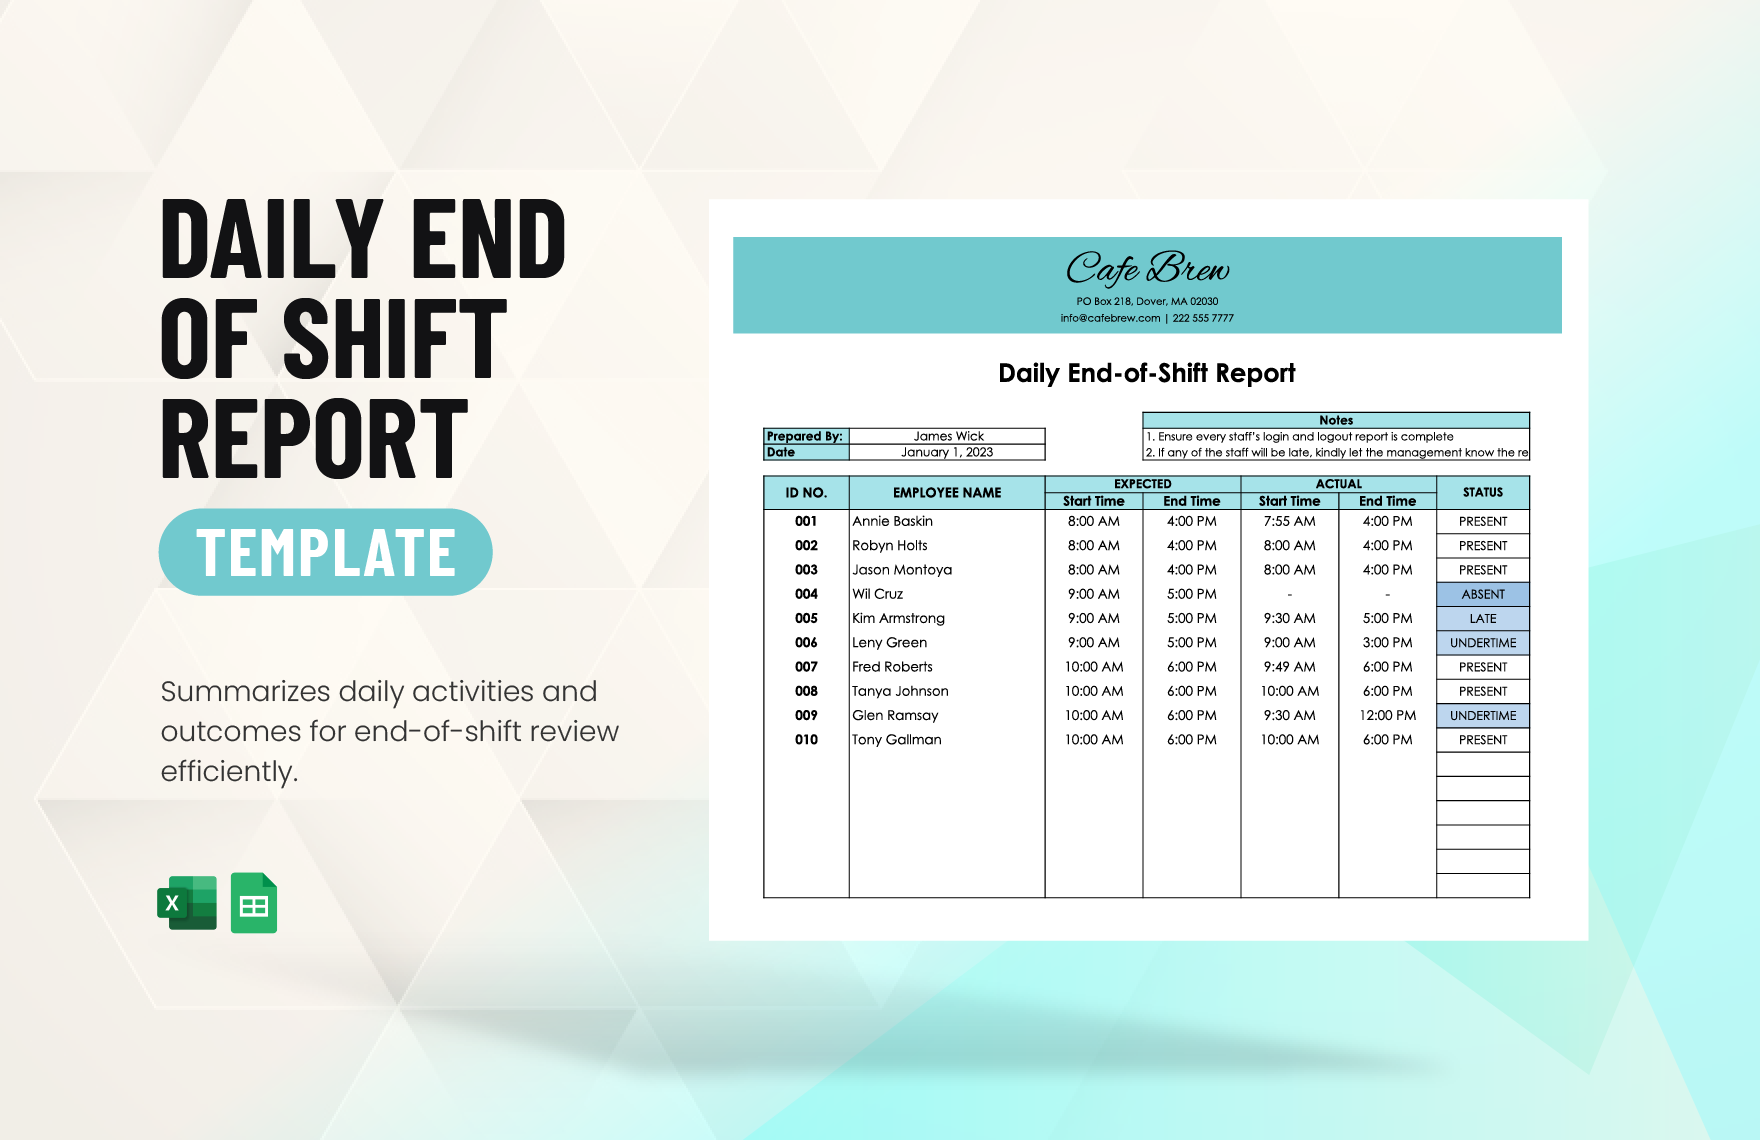 Daily End of Shift Report Template in Excel, Google Sheets